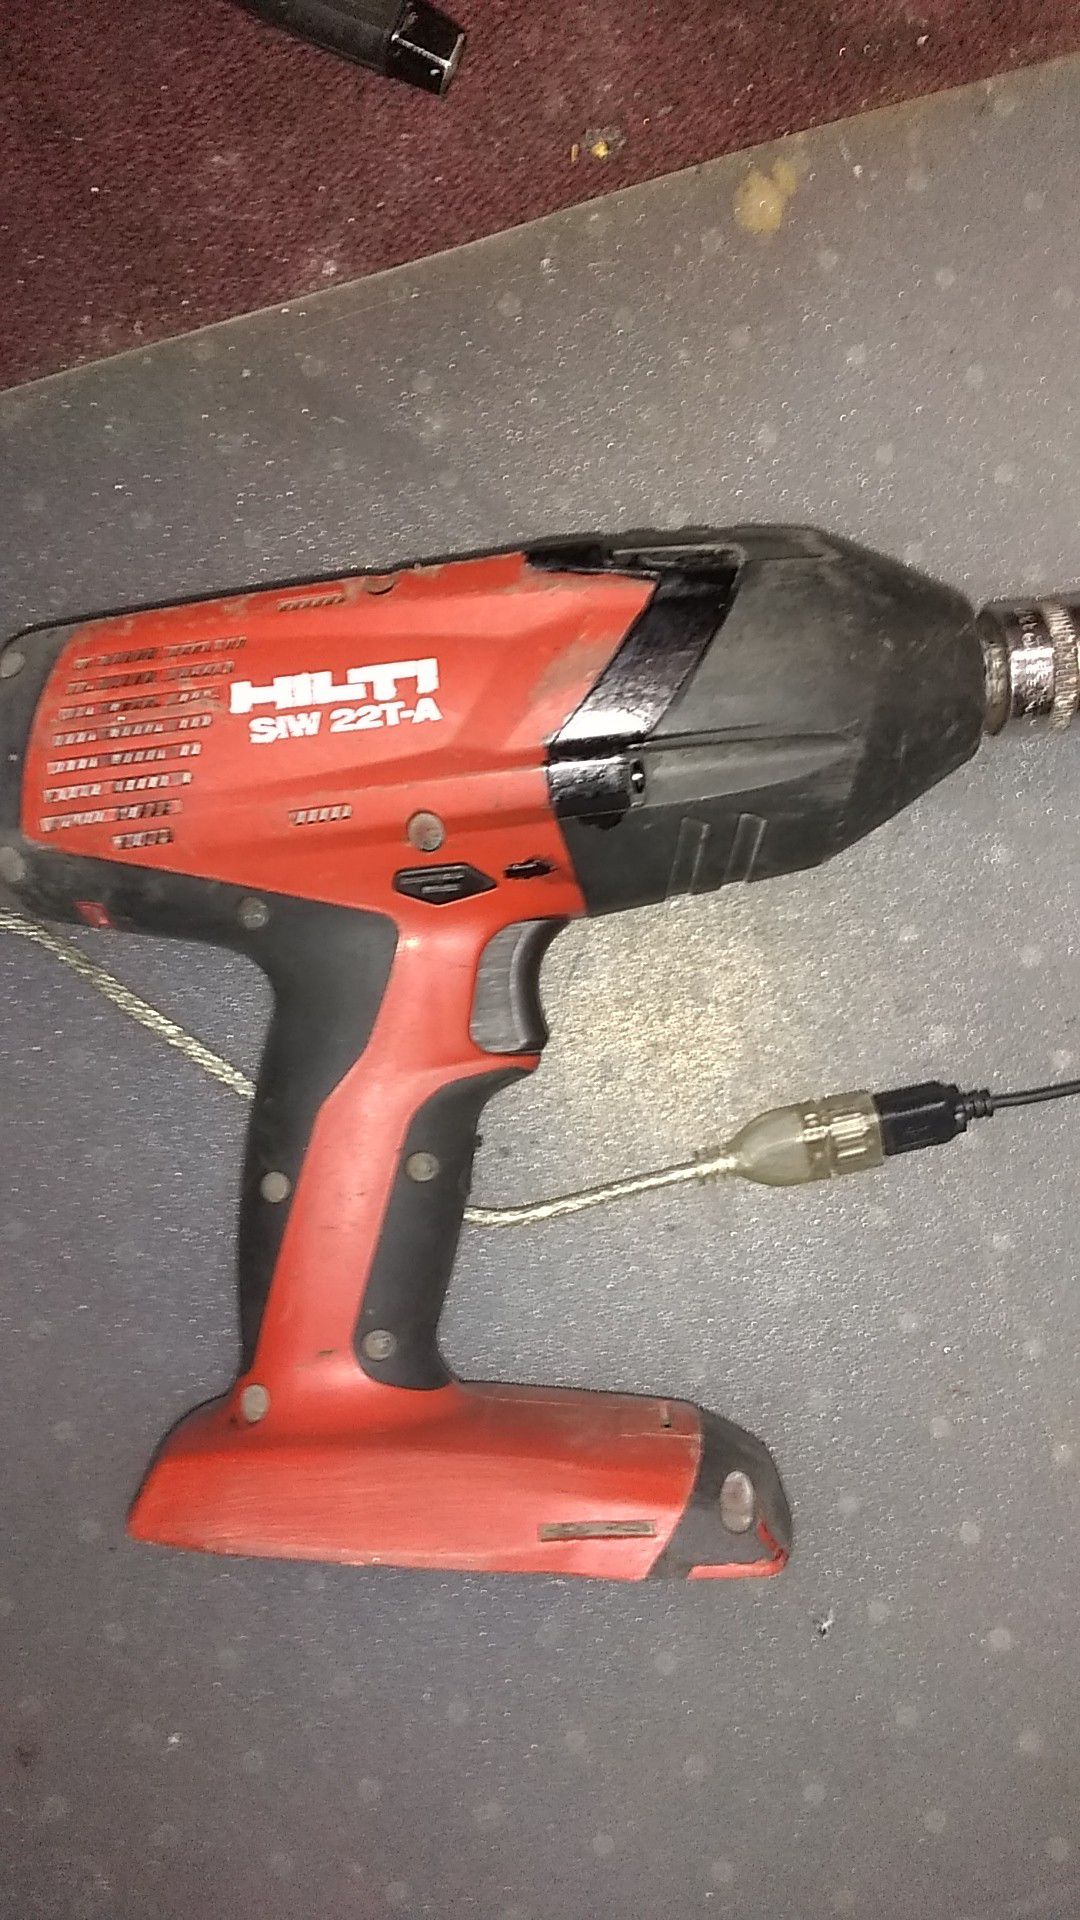 Hilti 22v 1/2" impact wrench great condition!! $180